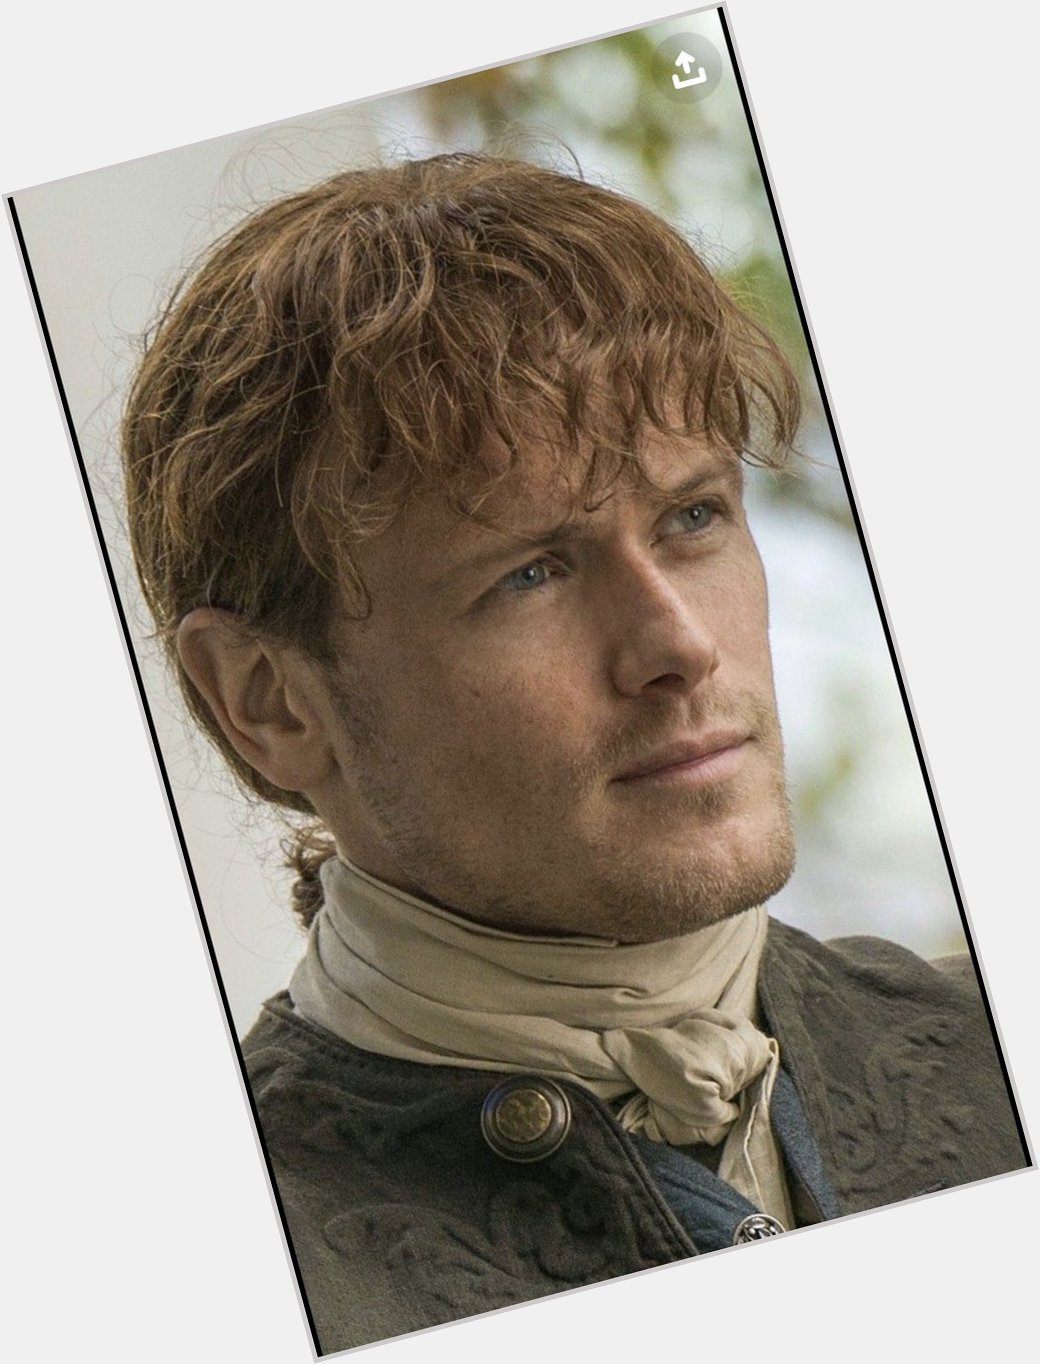 Happy 300th Birthday Jamie Fraser! Brought to us by the incredible Sam Heughan. 